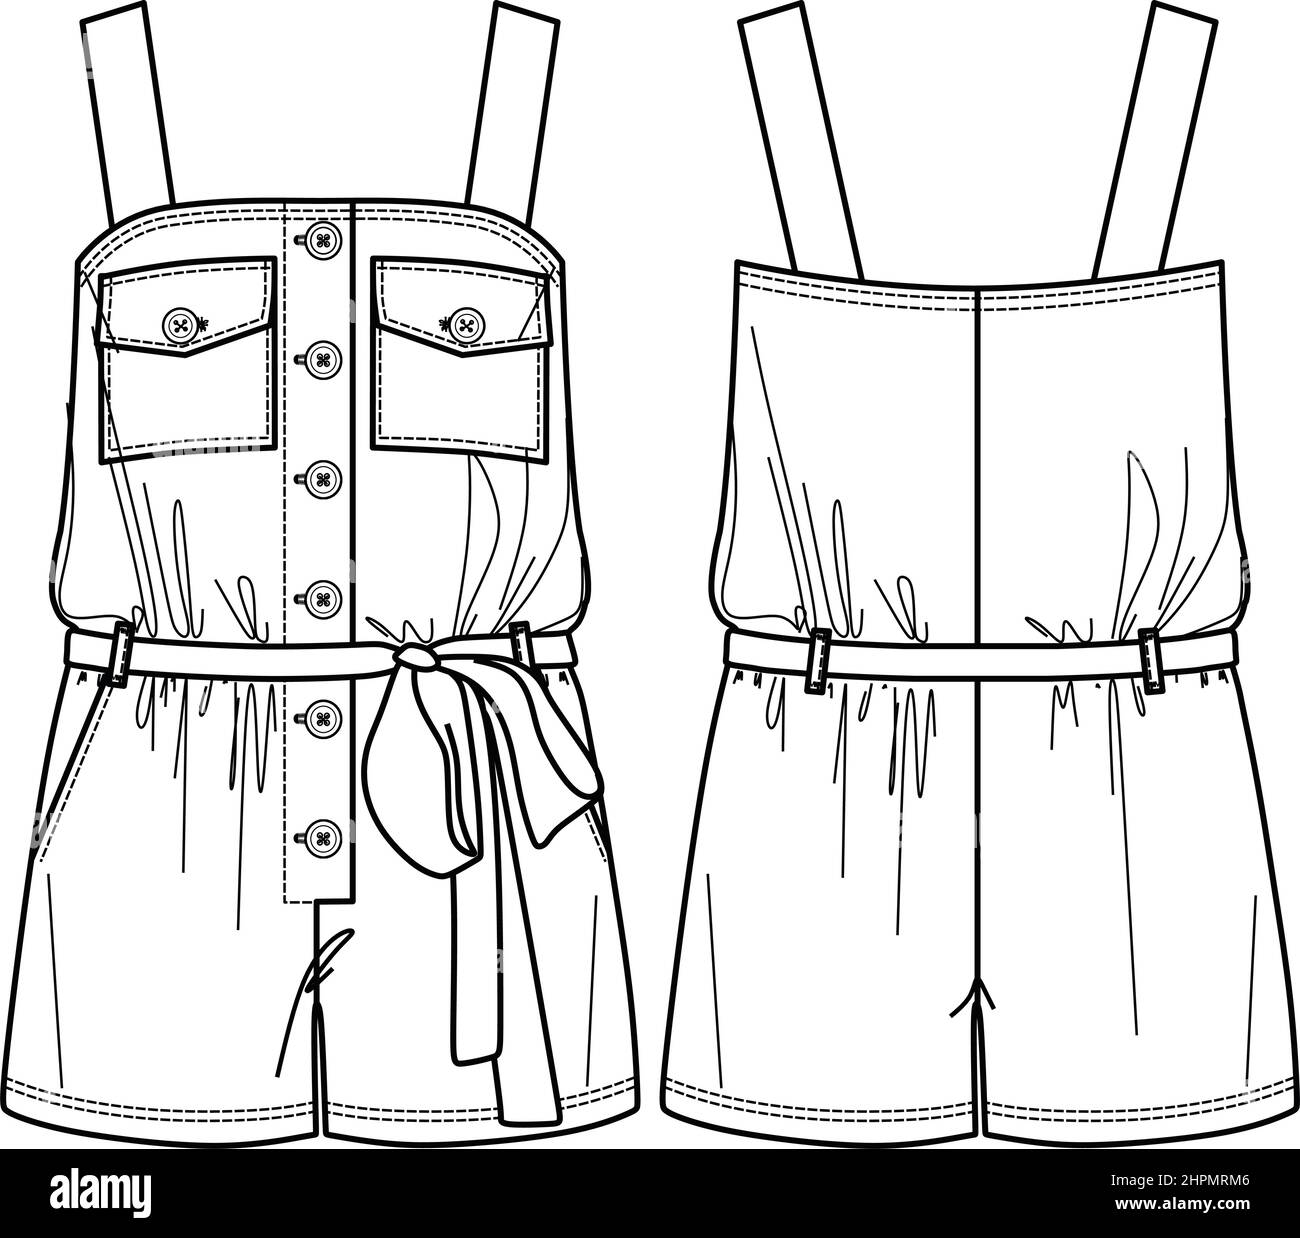 Technical Drawing Overalls Stock Illustrations  53 Technical Drawing  Overalls Stock Illustrations Vectors  Clipart  Dreamstime